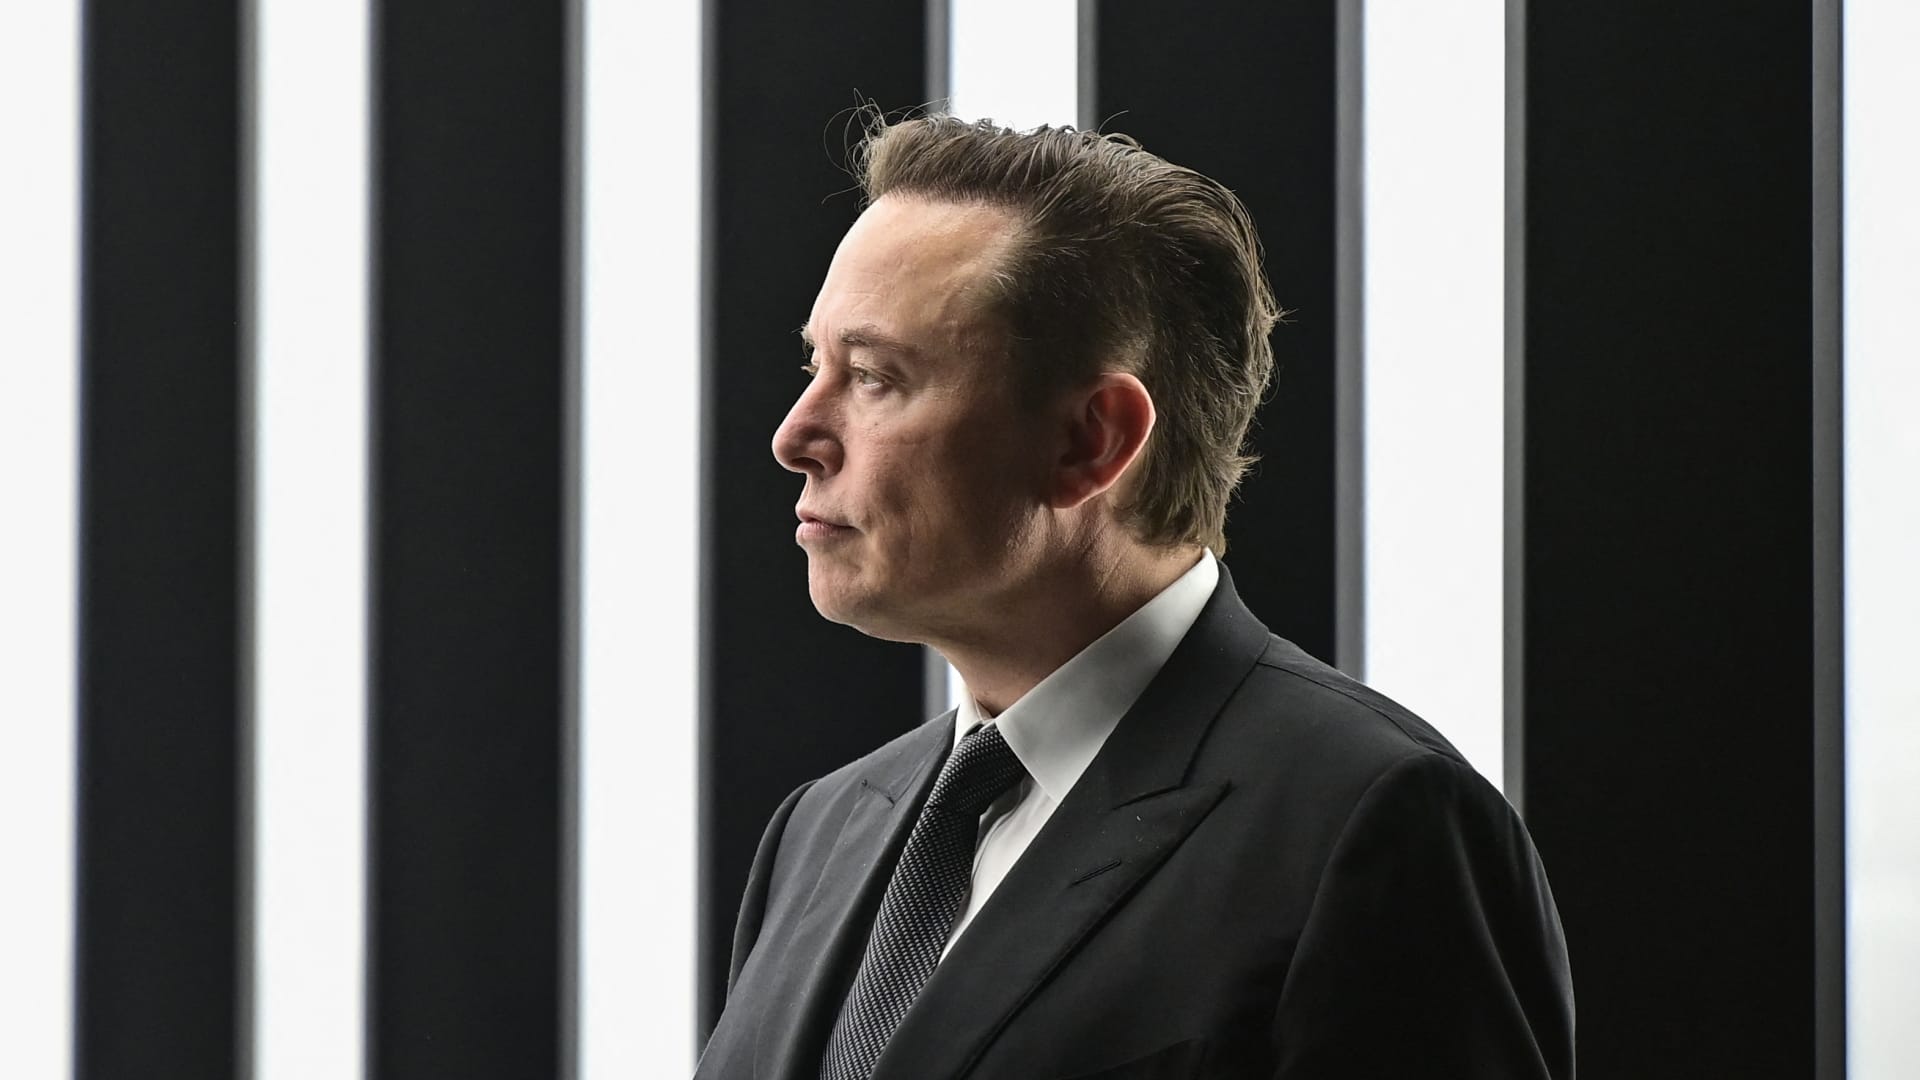 Musk met Twitter execs for three days before making a bid, unclear if they discu..